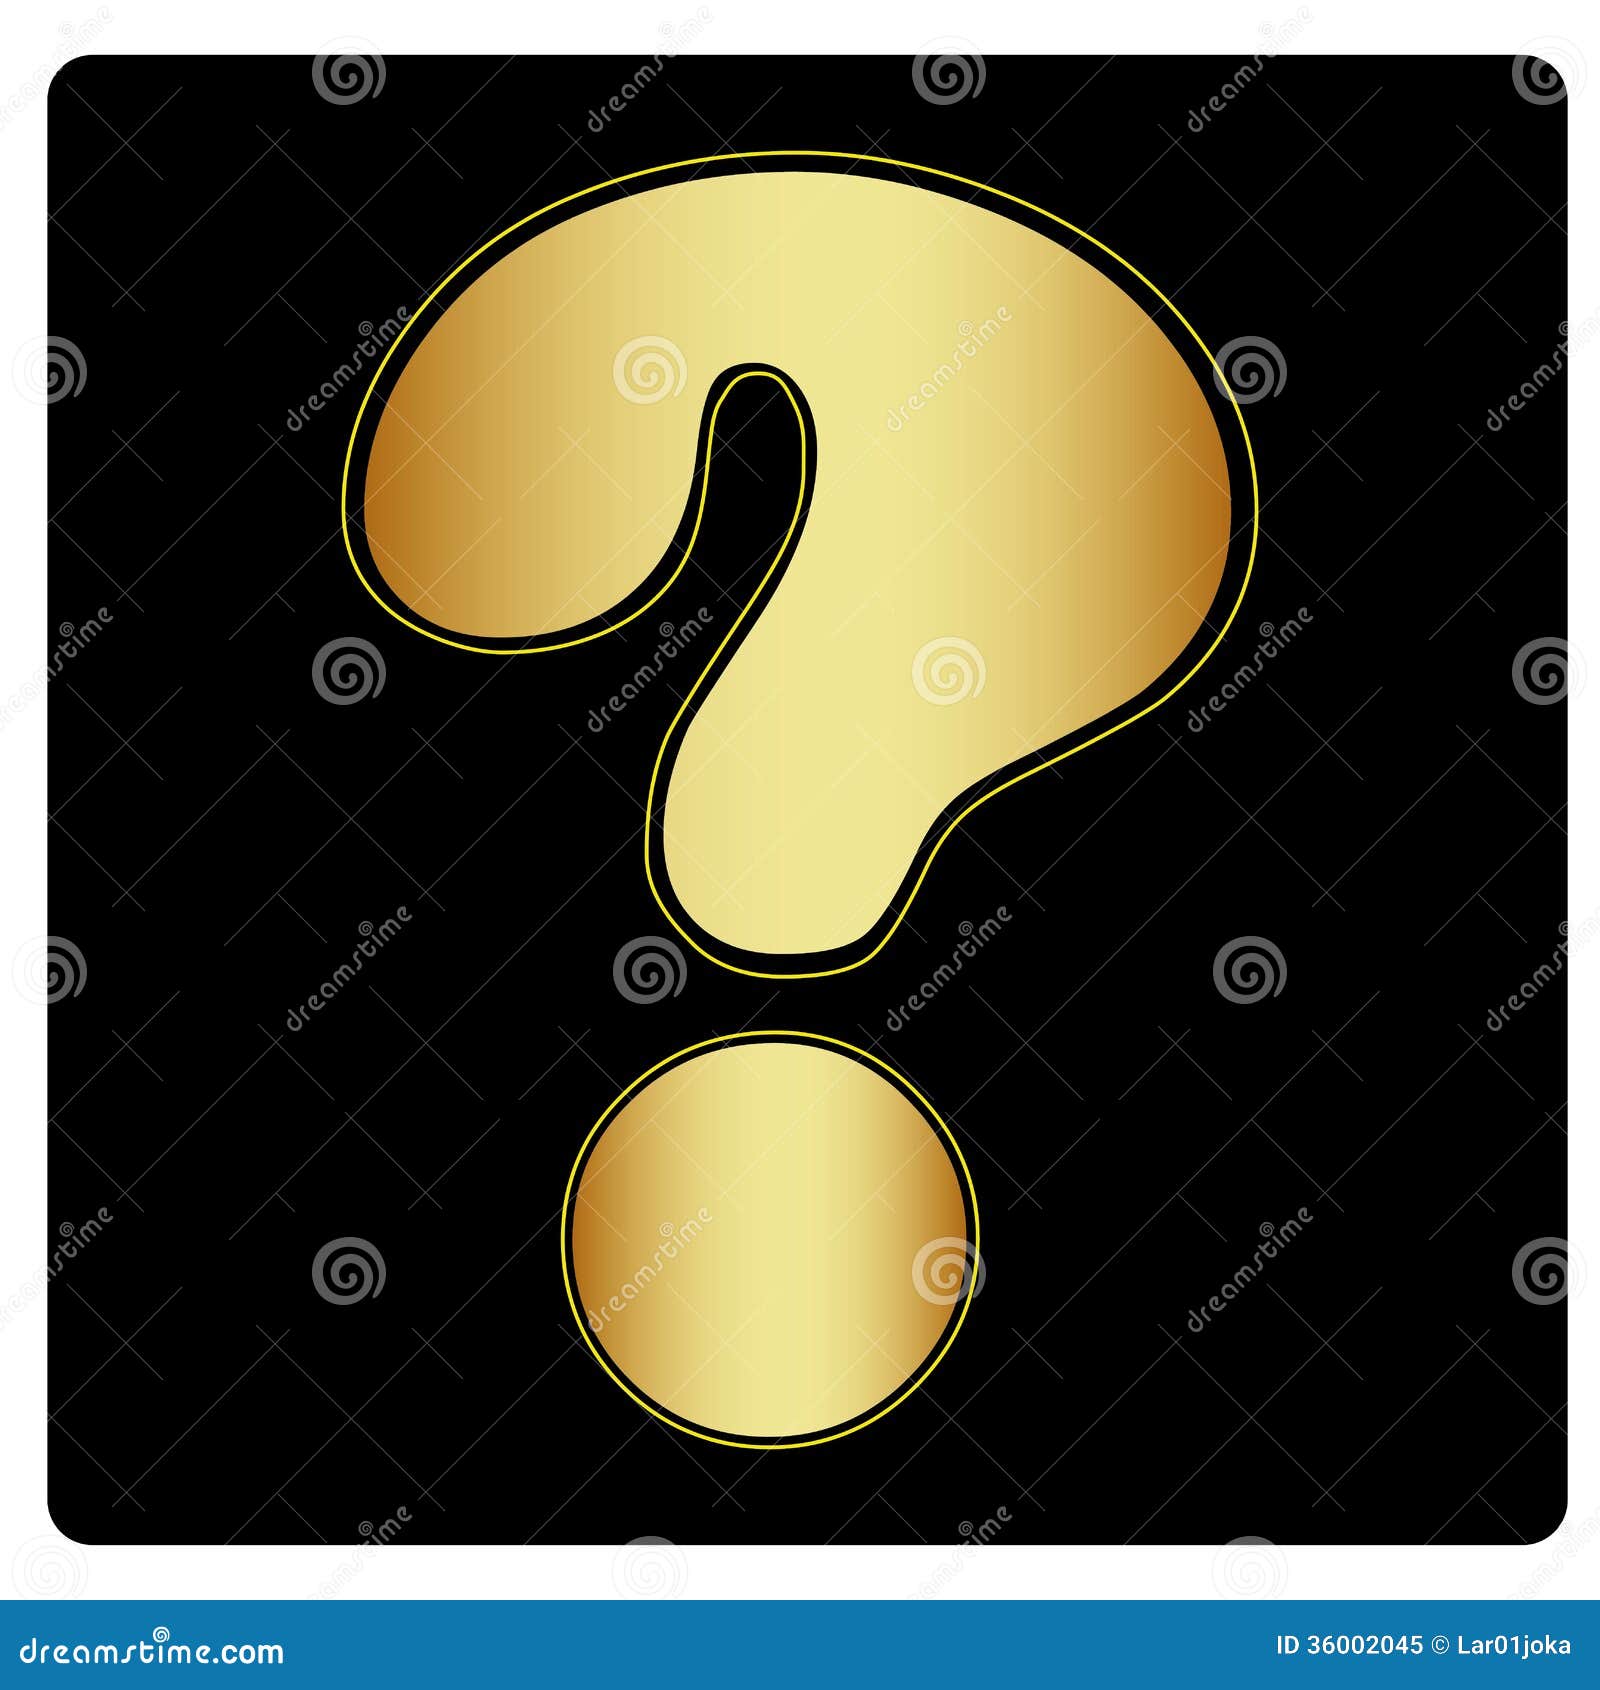 A yellow question mark with borders in a black background.